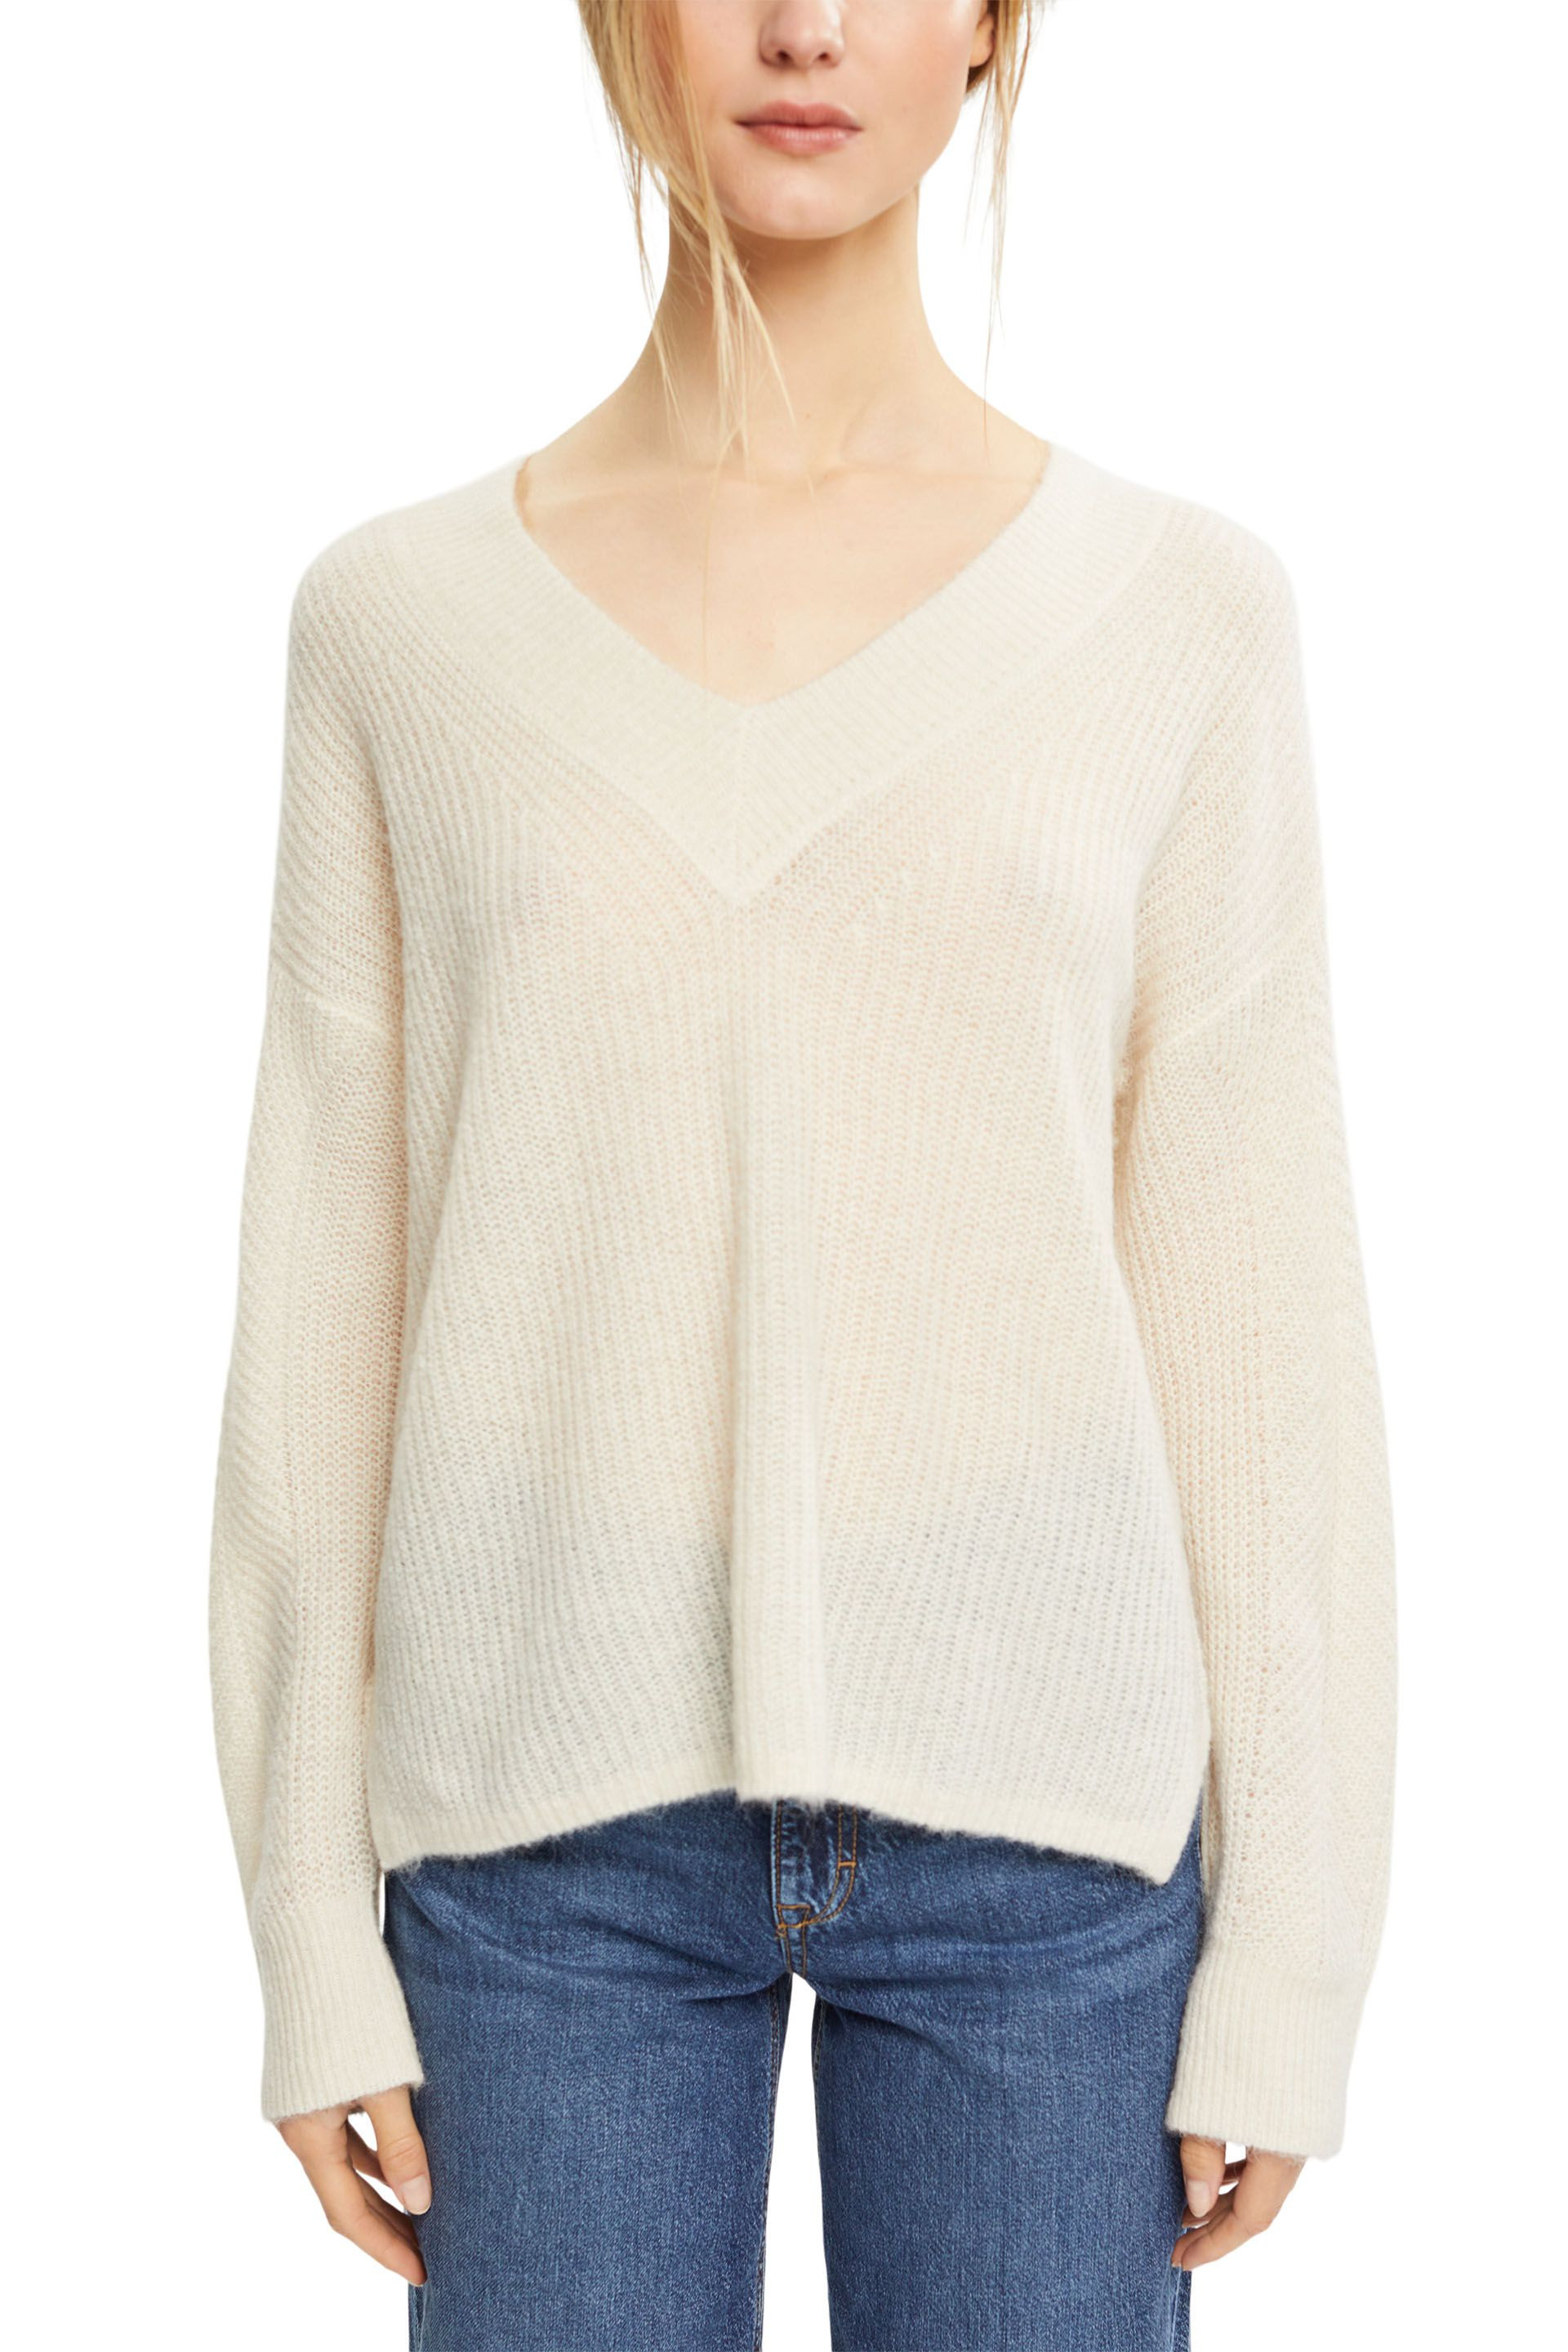 Pullover con scollo a V, Beige, large image number 1